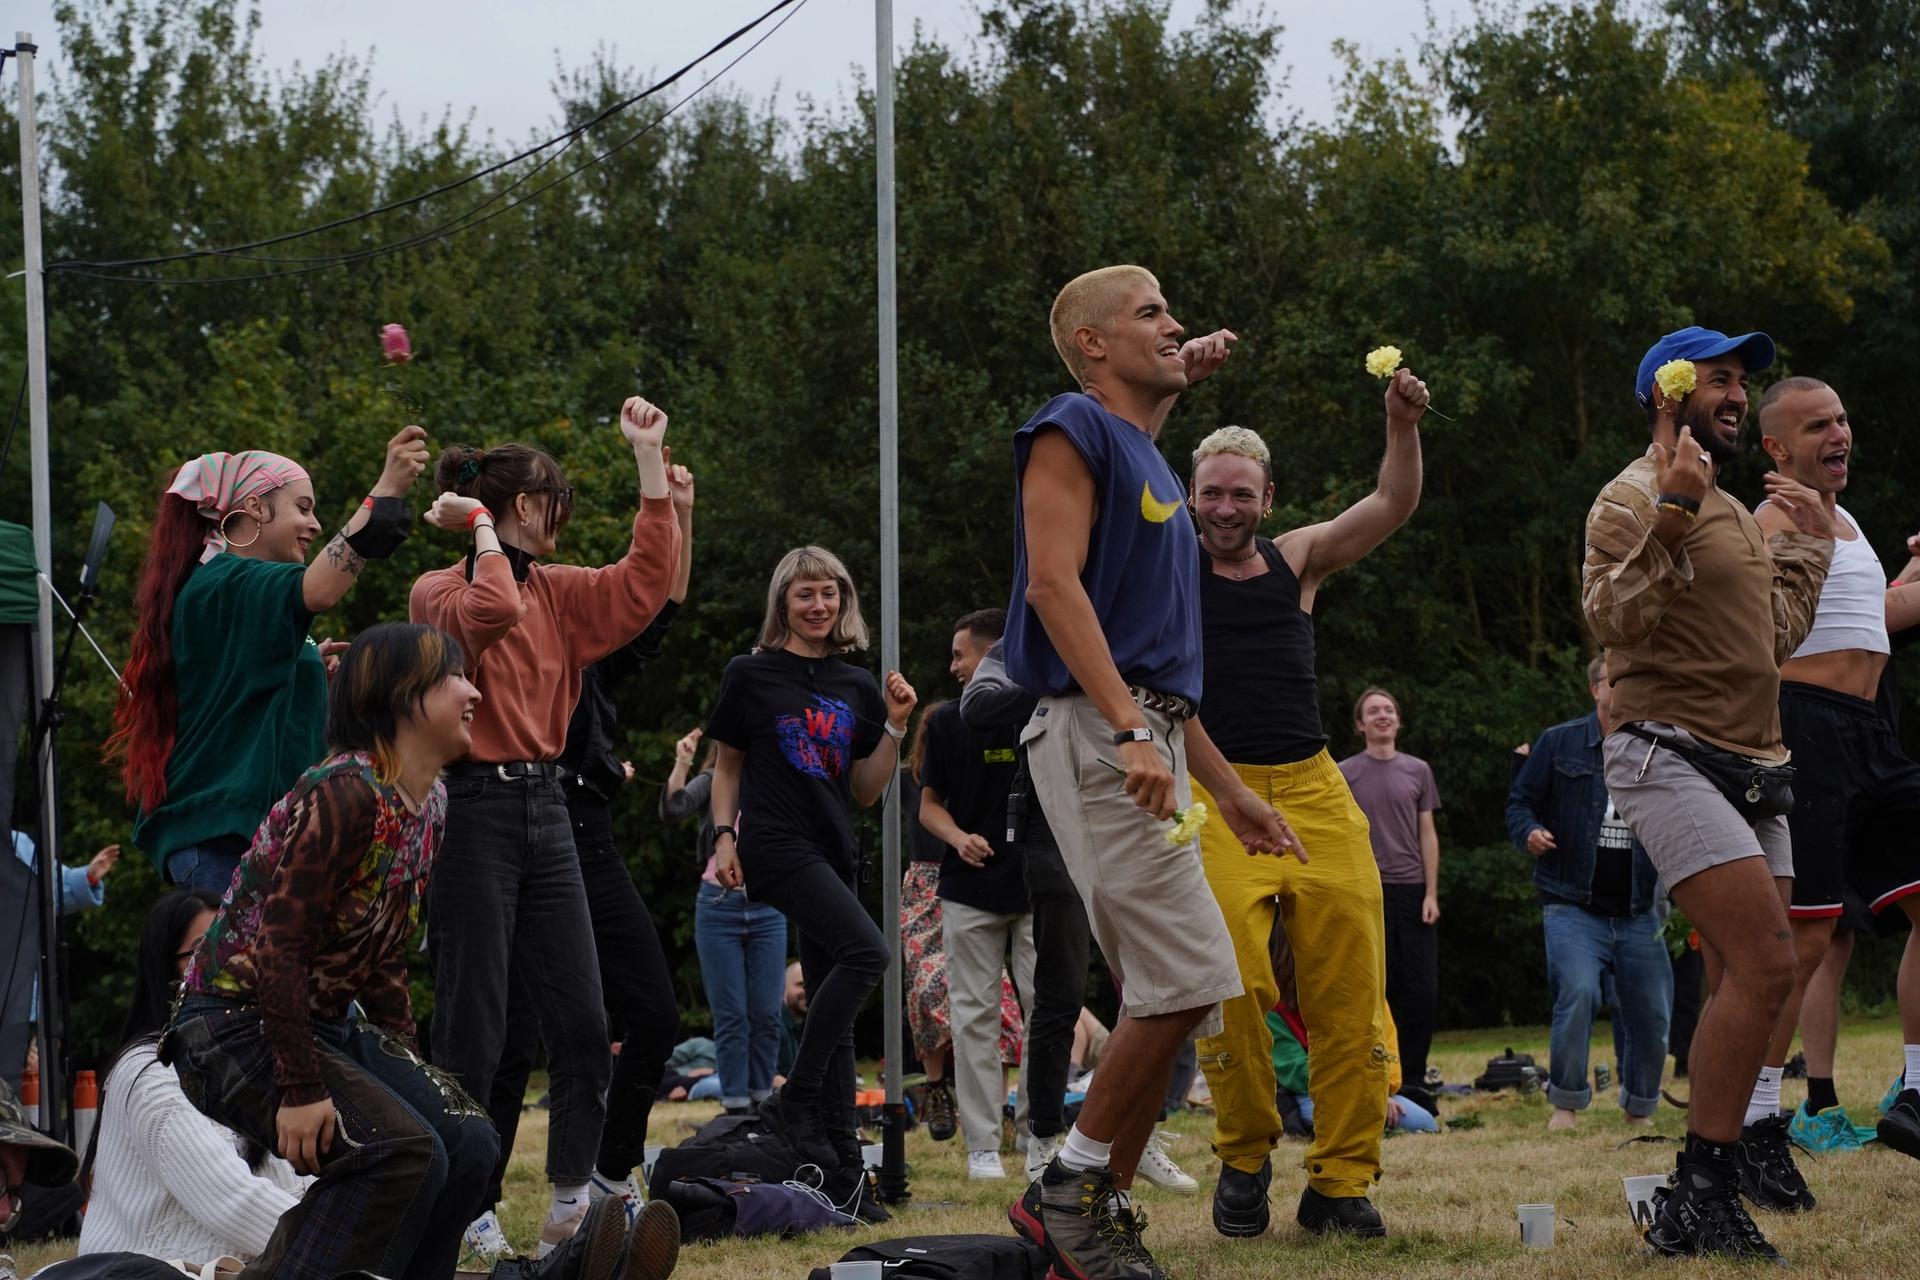 Wysing Arts Centre in Cambridgeshire (its annual festival, pictured) will receive £500,000 from Freelands Foundation. Photo: Chloe Page